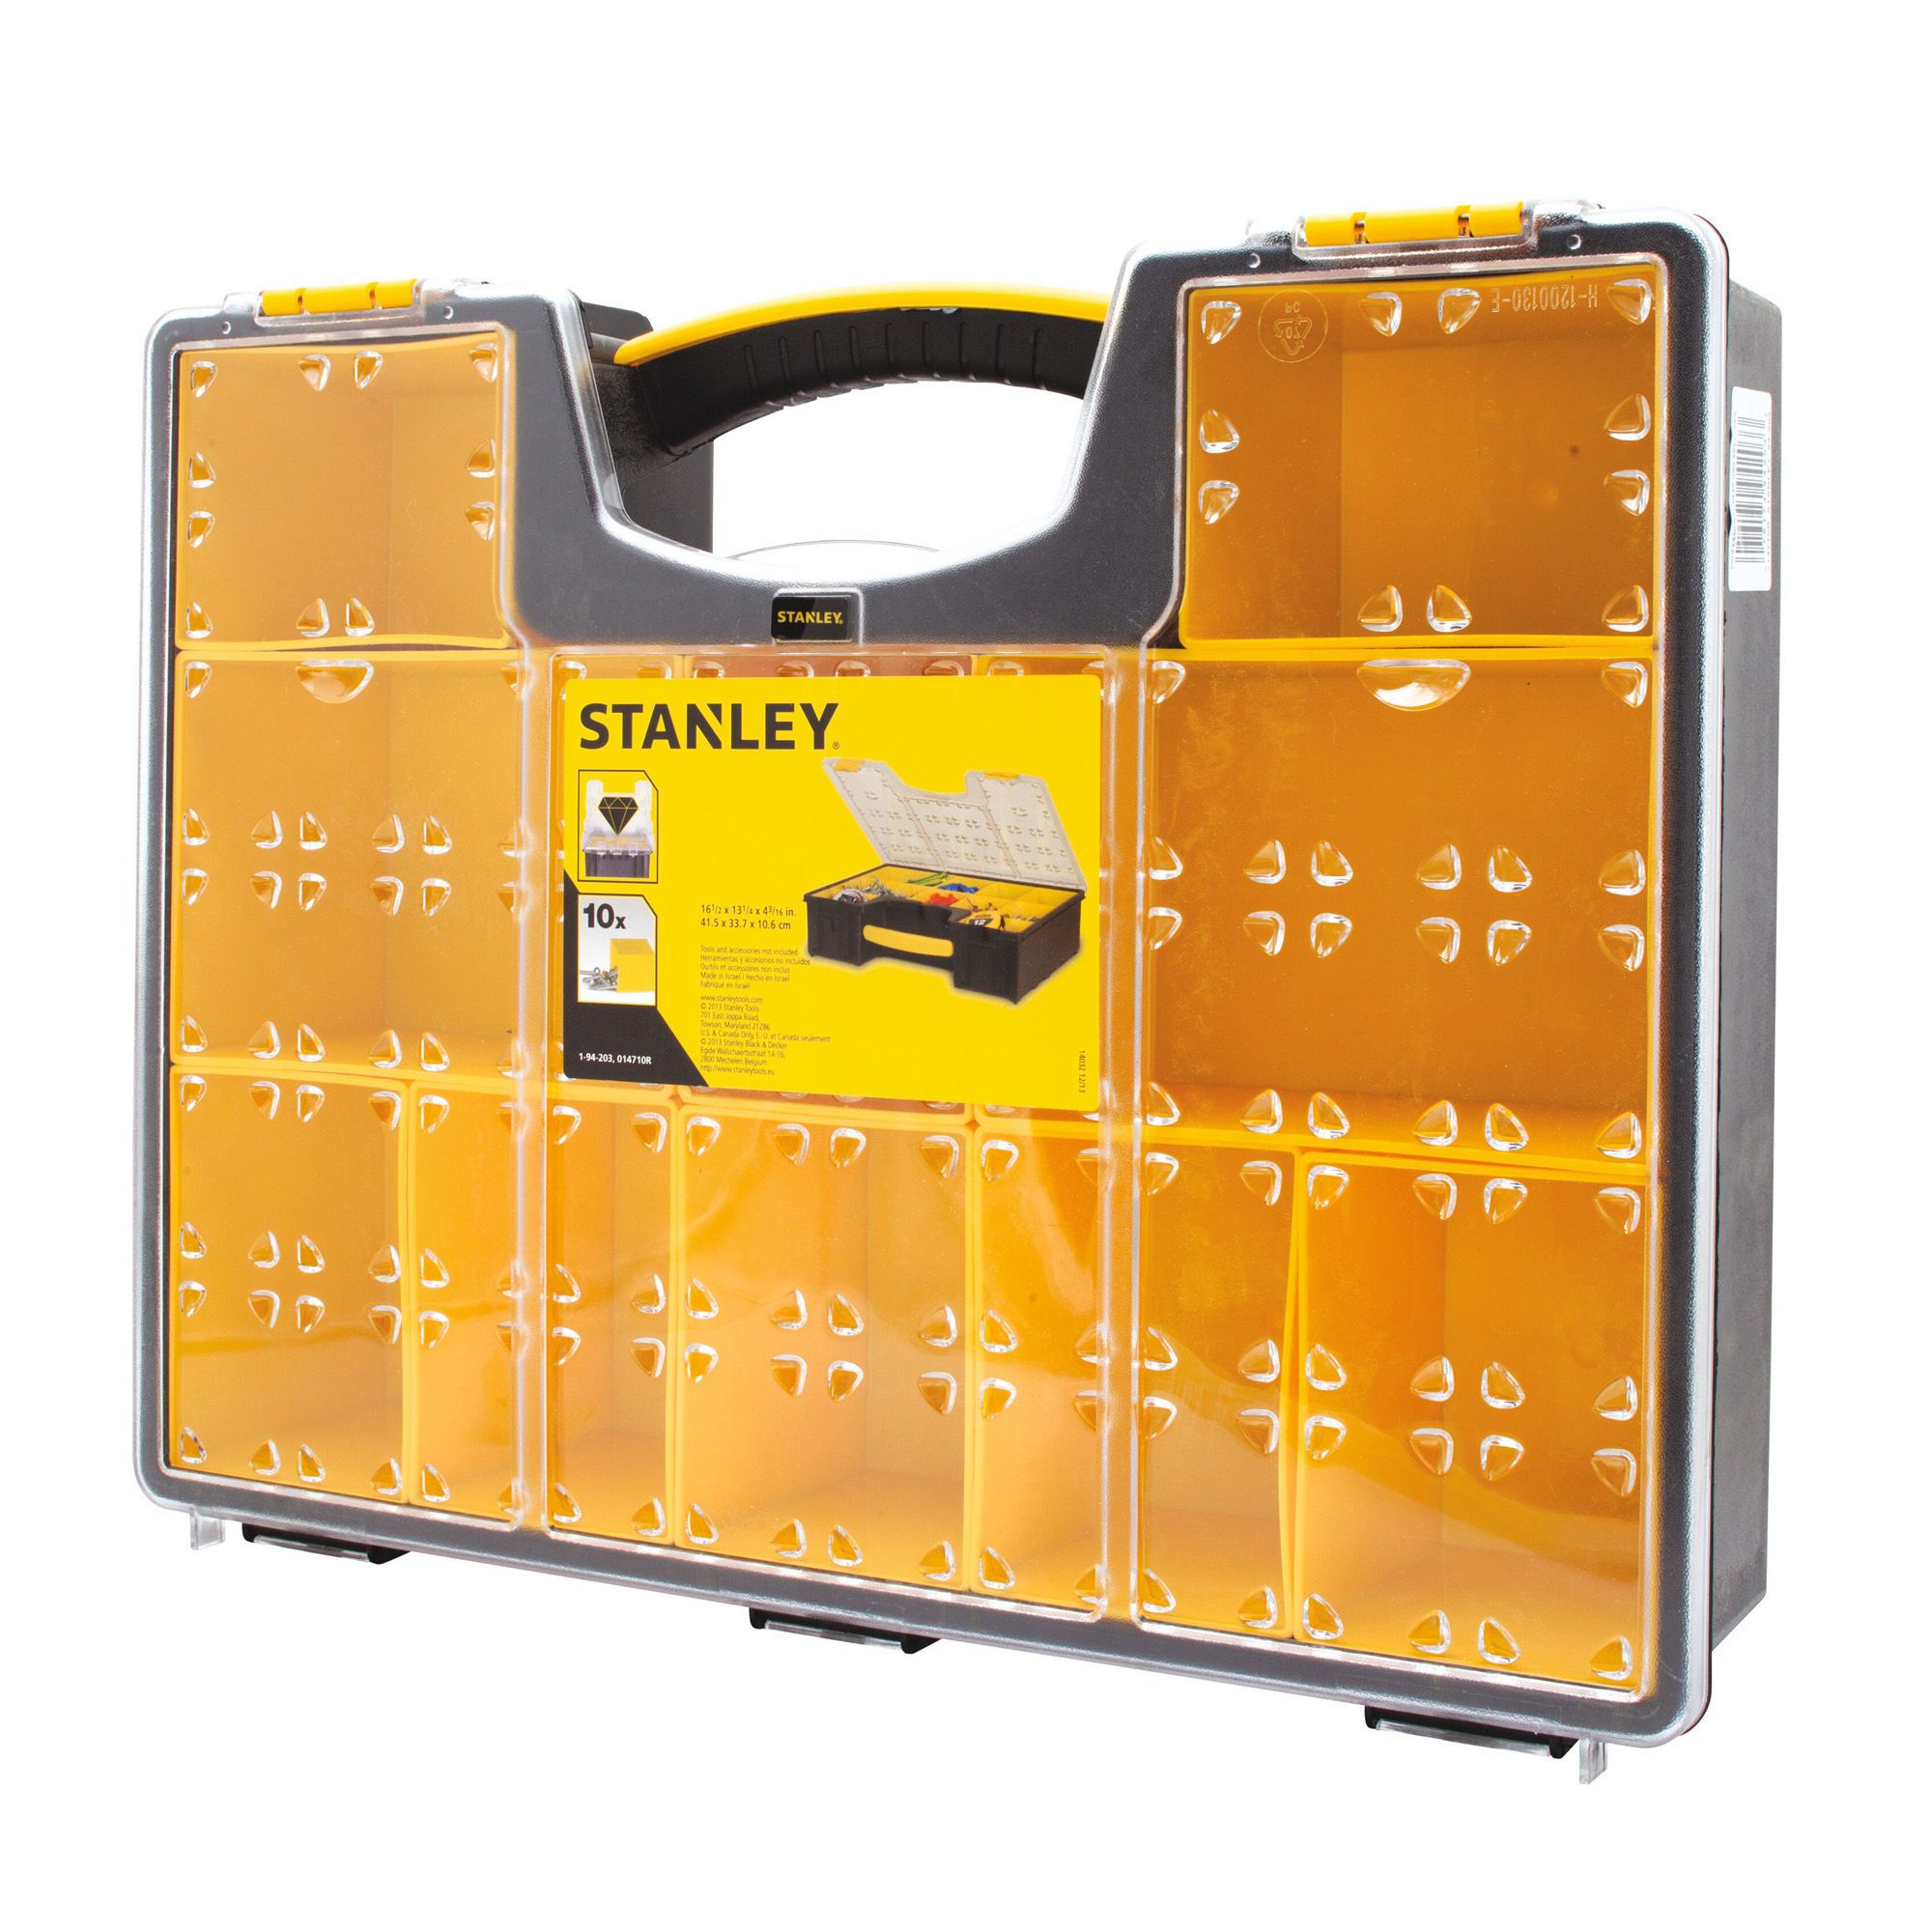 Deep Professional Organizer - 10 Compartments from STANLEY